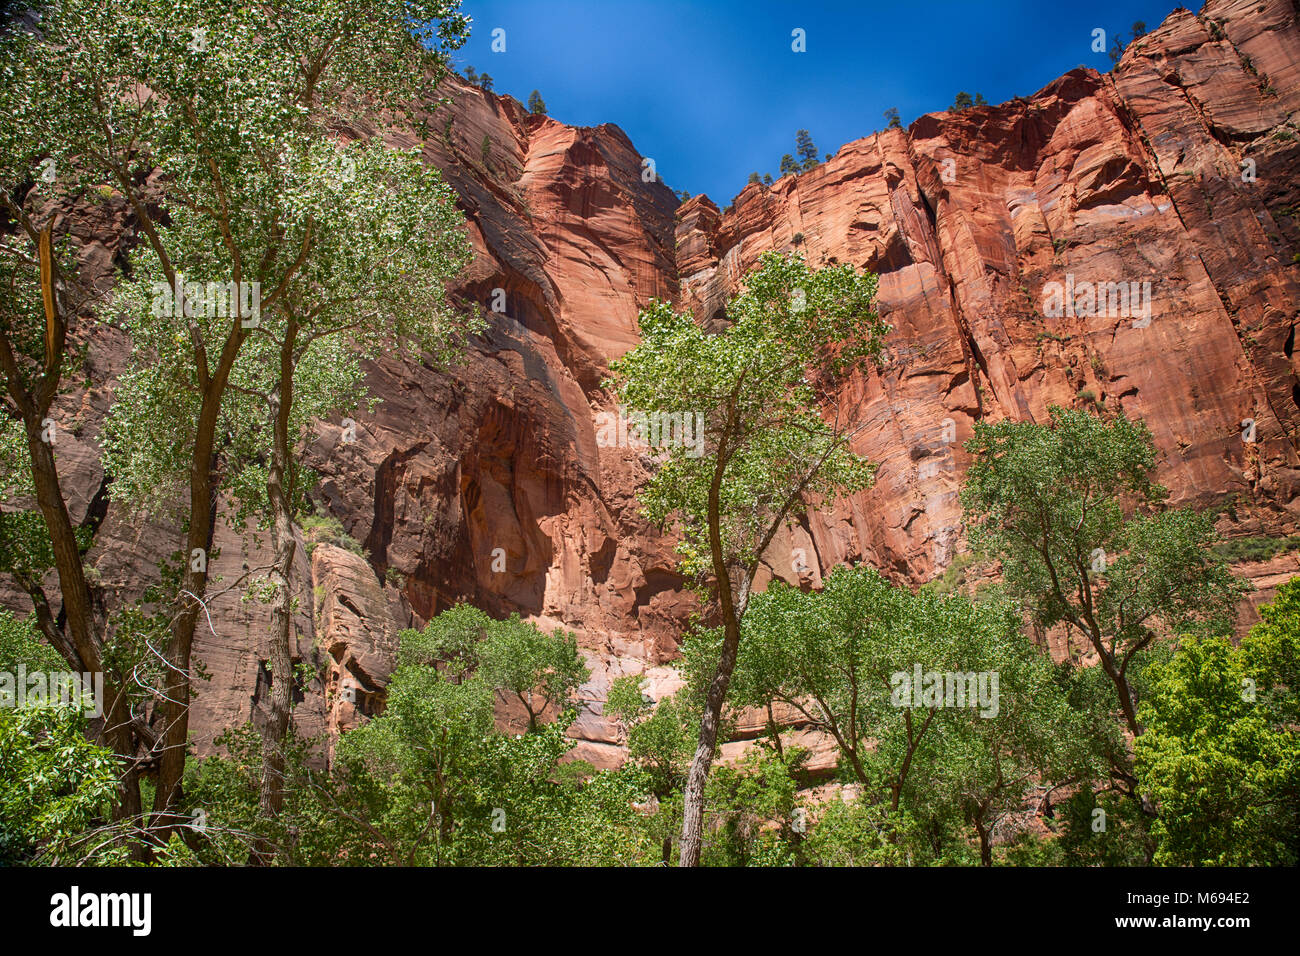 The tour guide mentioned that this was a Indian watch site at Zion. Stock Photo